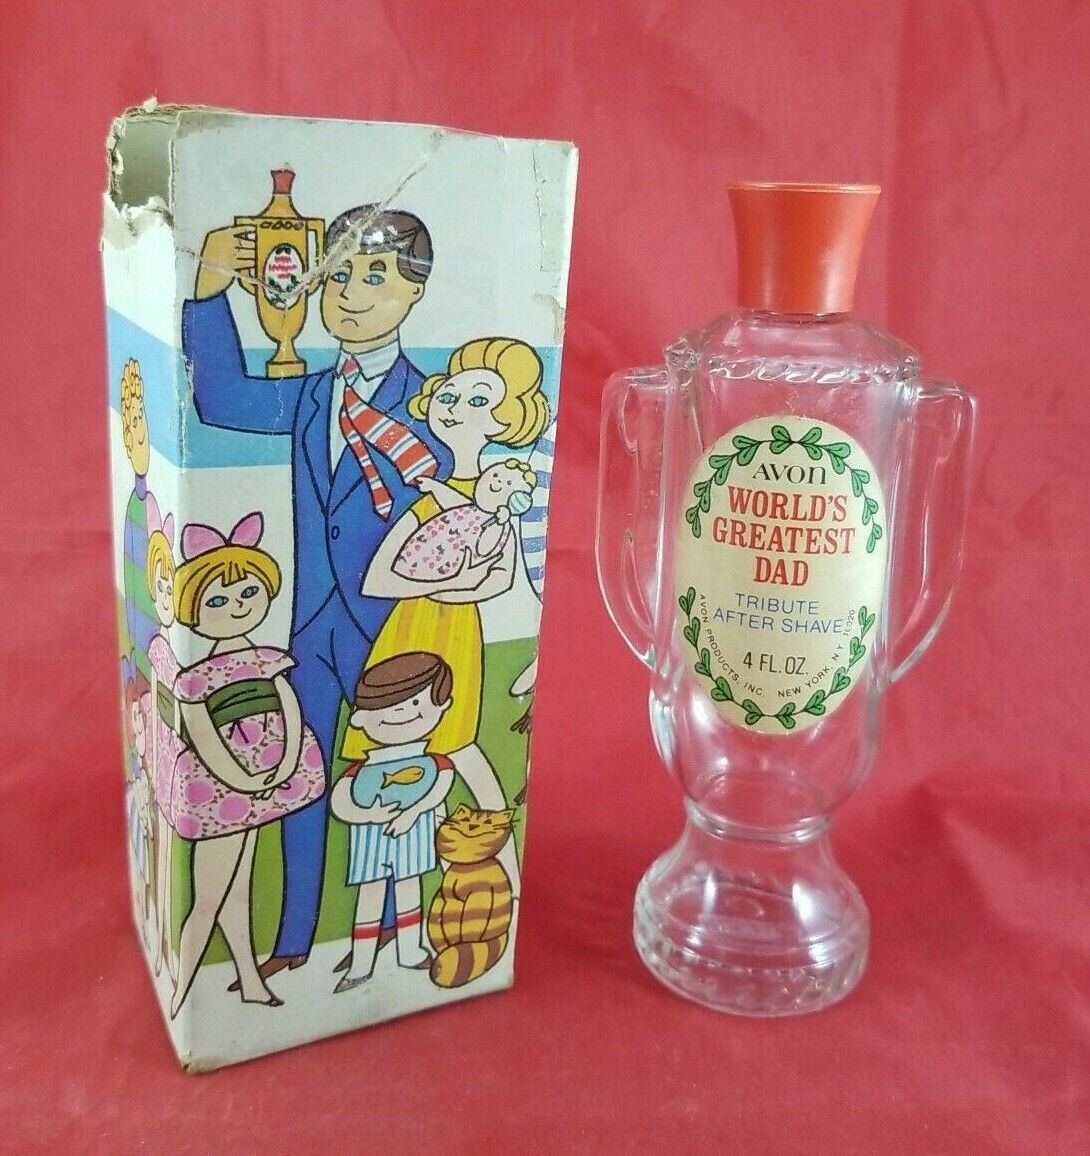 Avon World's Greatest Dad Tribute After Shave Trophy Bottle Empty With Box